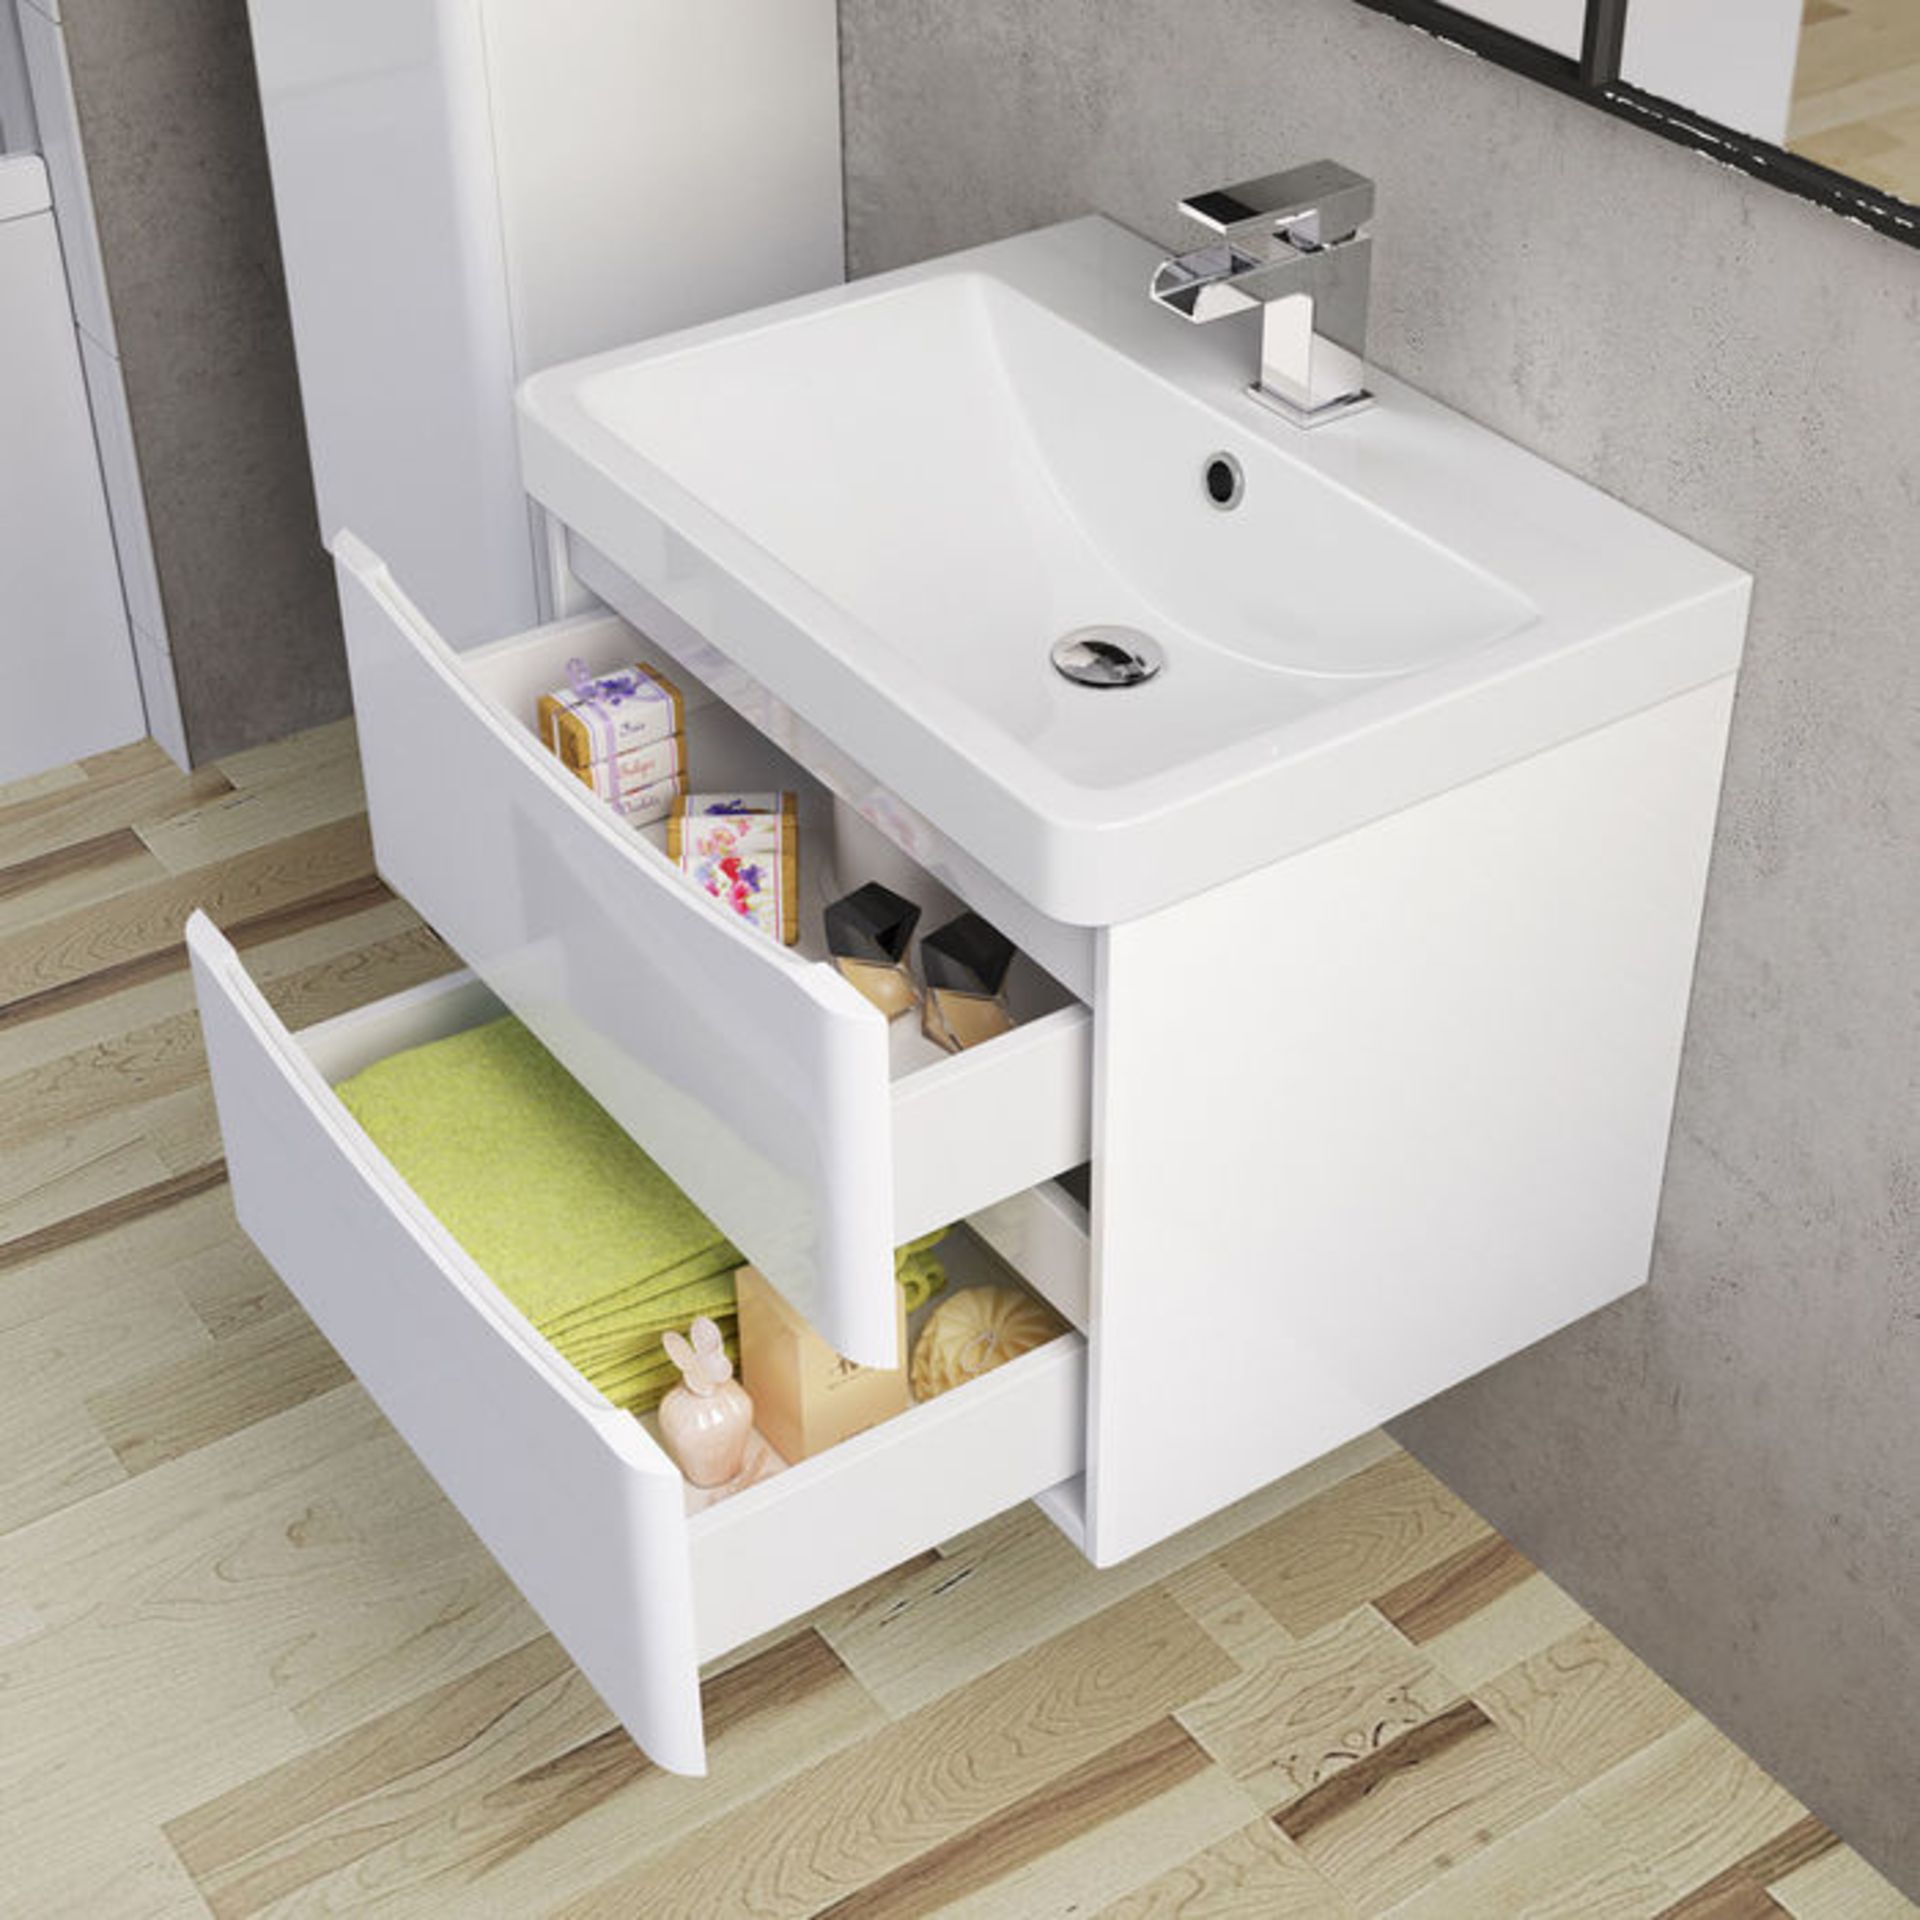 (MQ8) 600mm Austin II Gloss White Built In Sink Drawer Unit - Wall Hung. RRP £499.99. Comes co... - Image 2 of 5